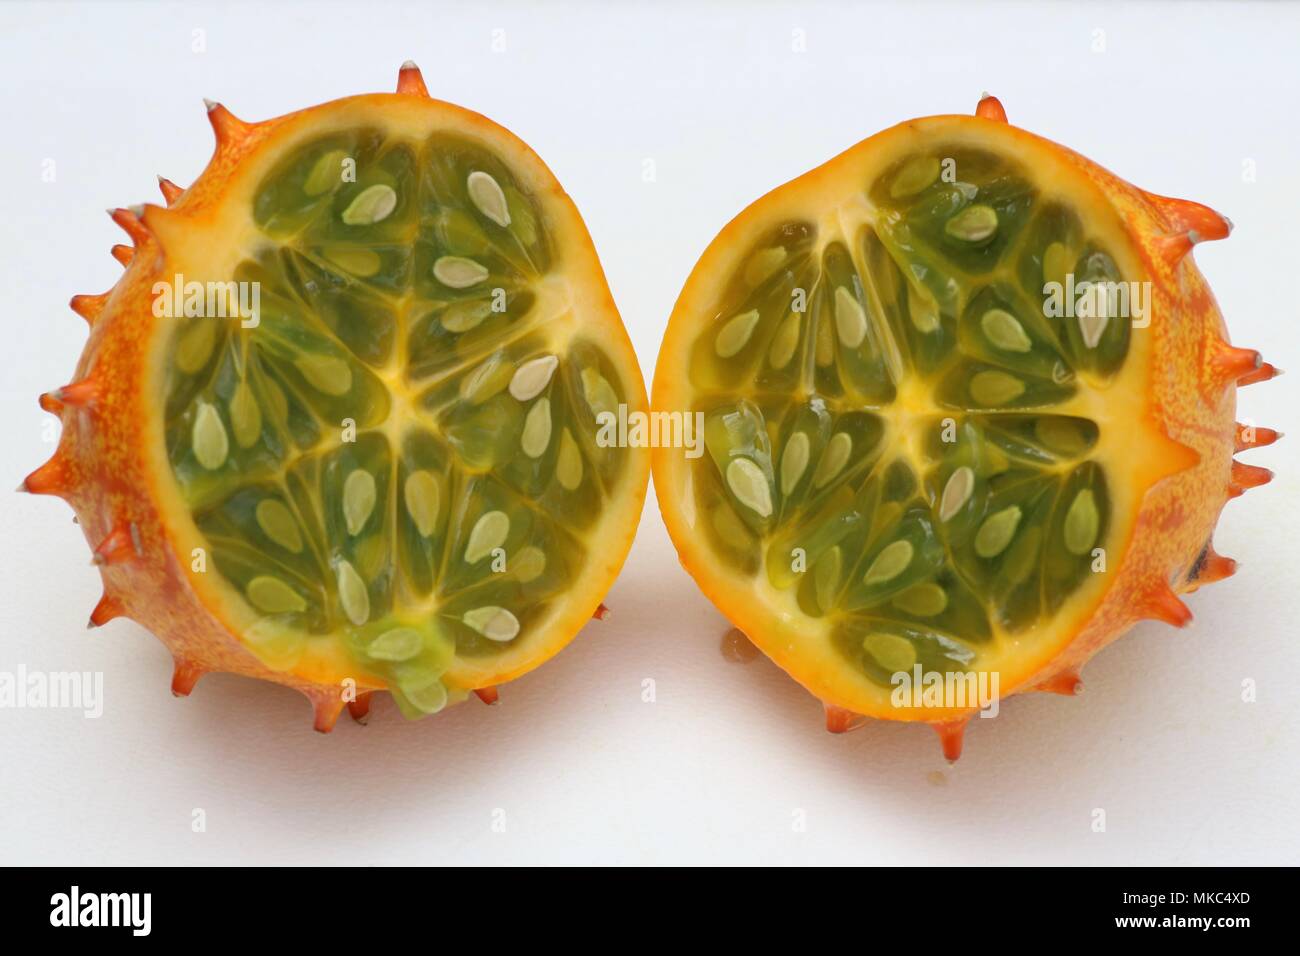 Cut open kiwano horned melon against a white background Stock Photo